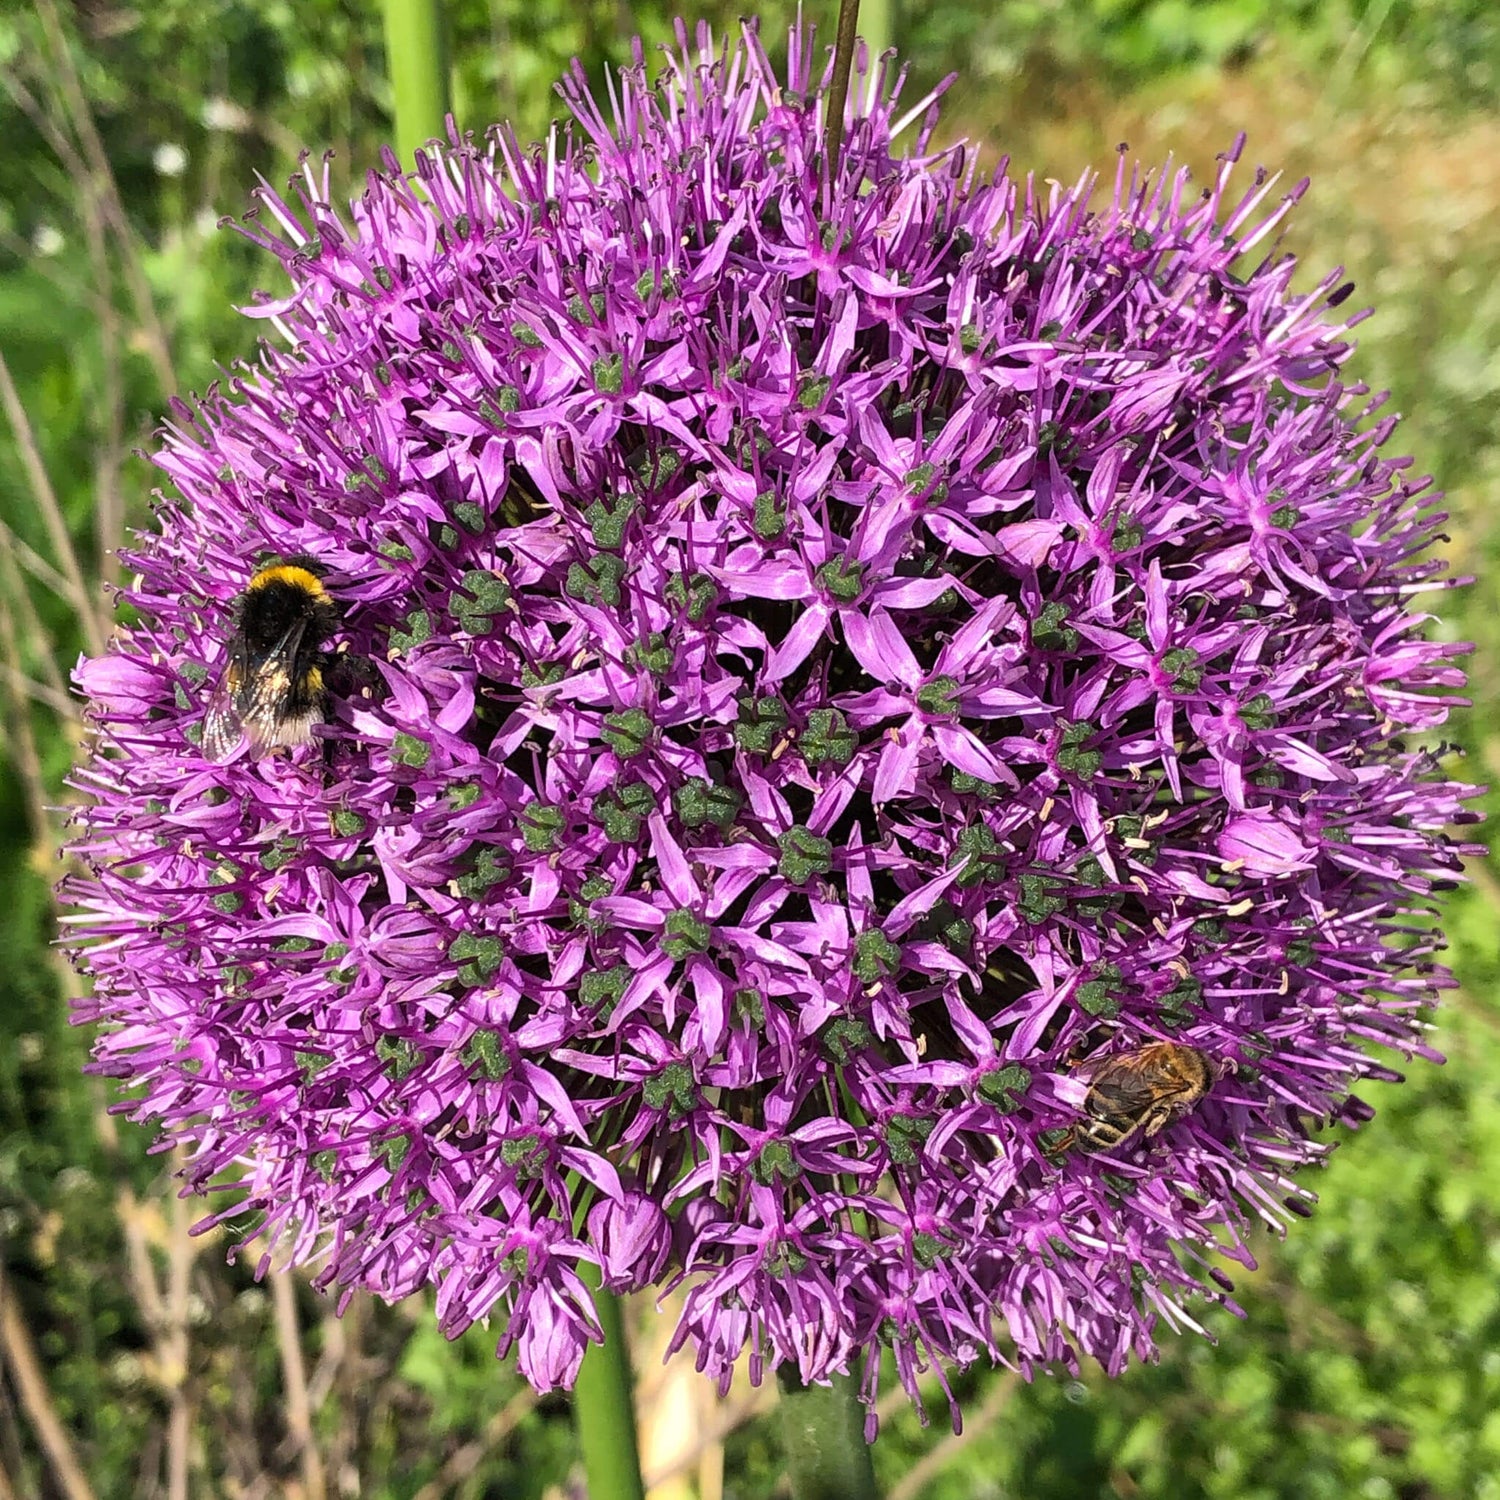  A purple flower with green surroundings, with a bumblebee and a smaller bee.